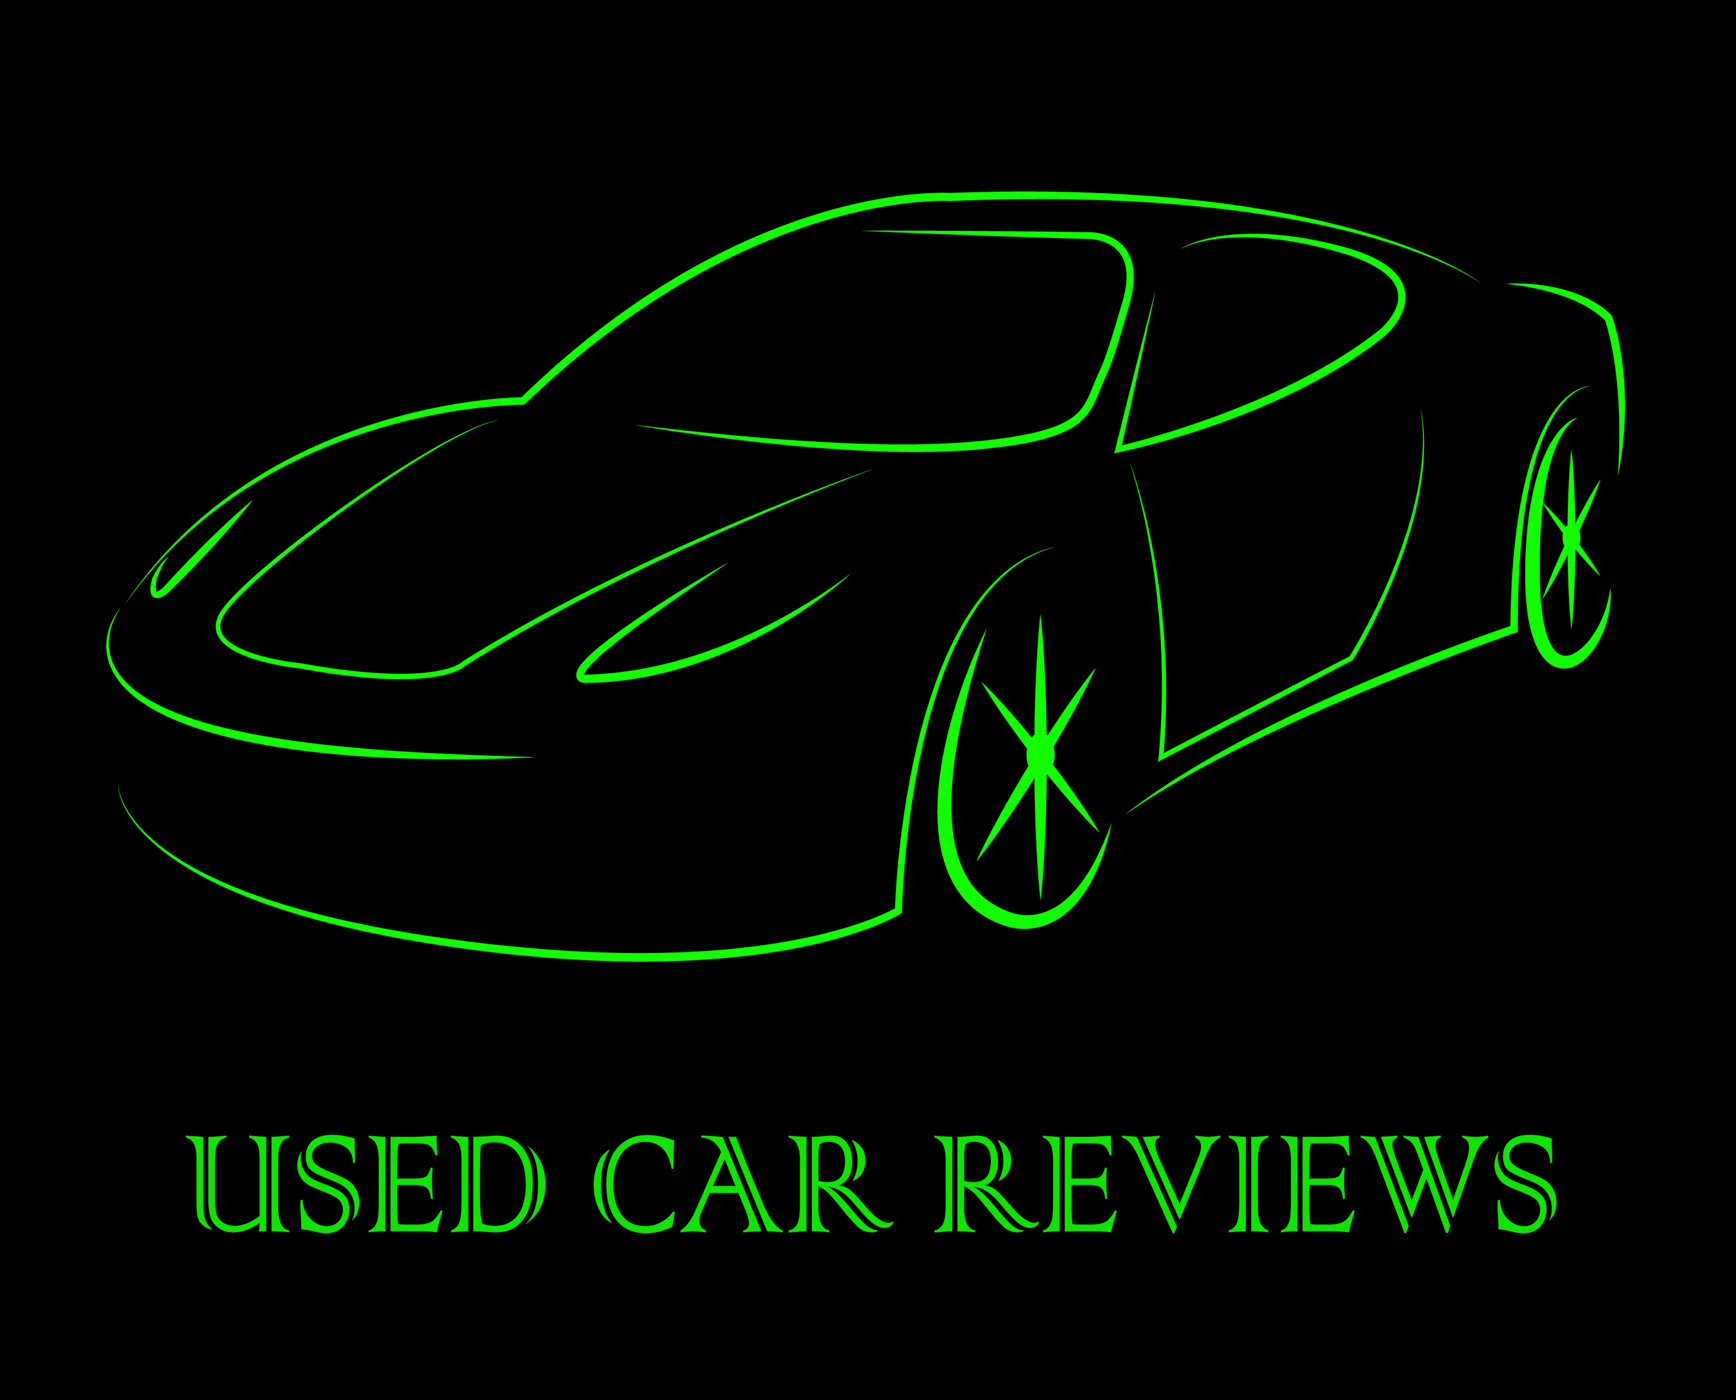 Used car reviews indicates pre owned and appraisal photo